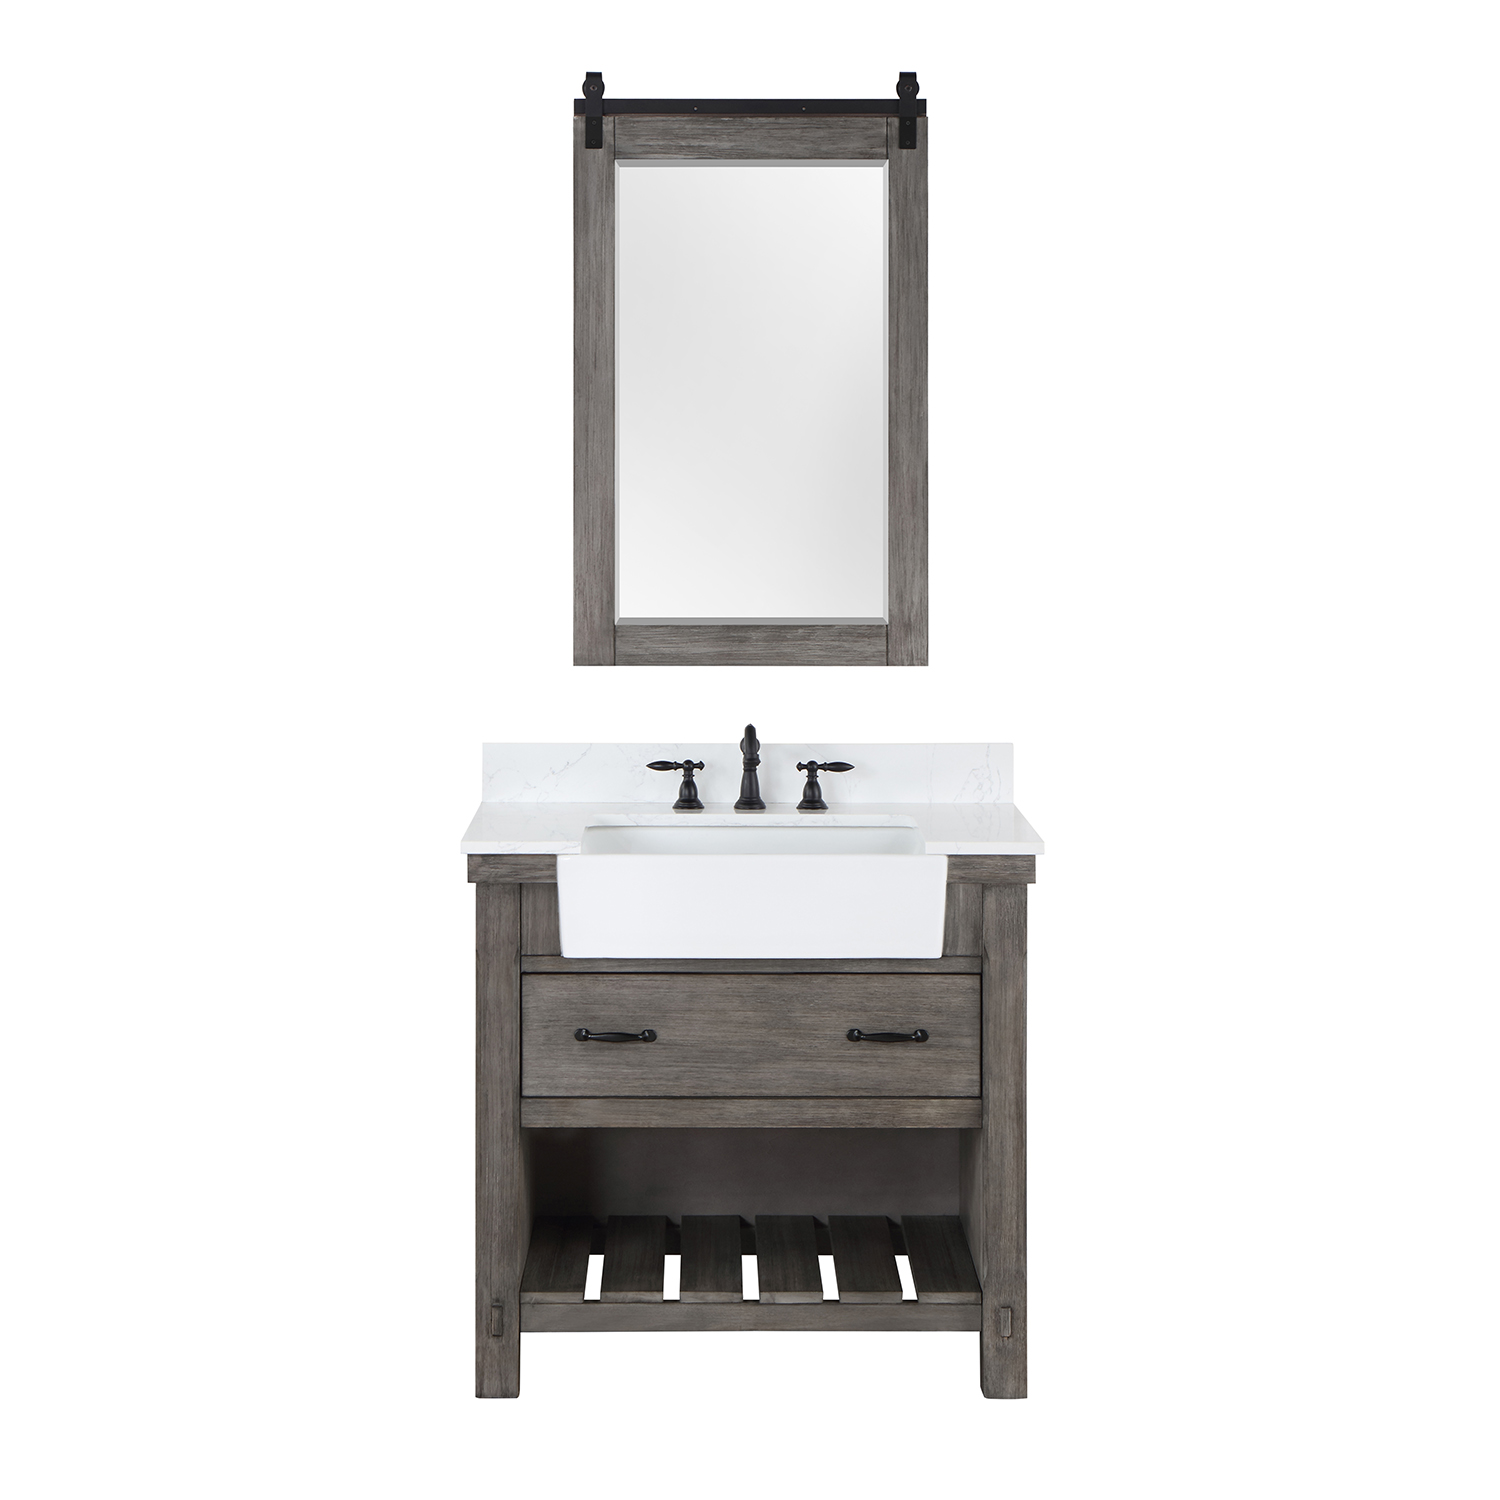 36" Single Bath Vanity in Classical Grey with Composite Stone Top in White, White Farmhouse Basin